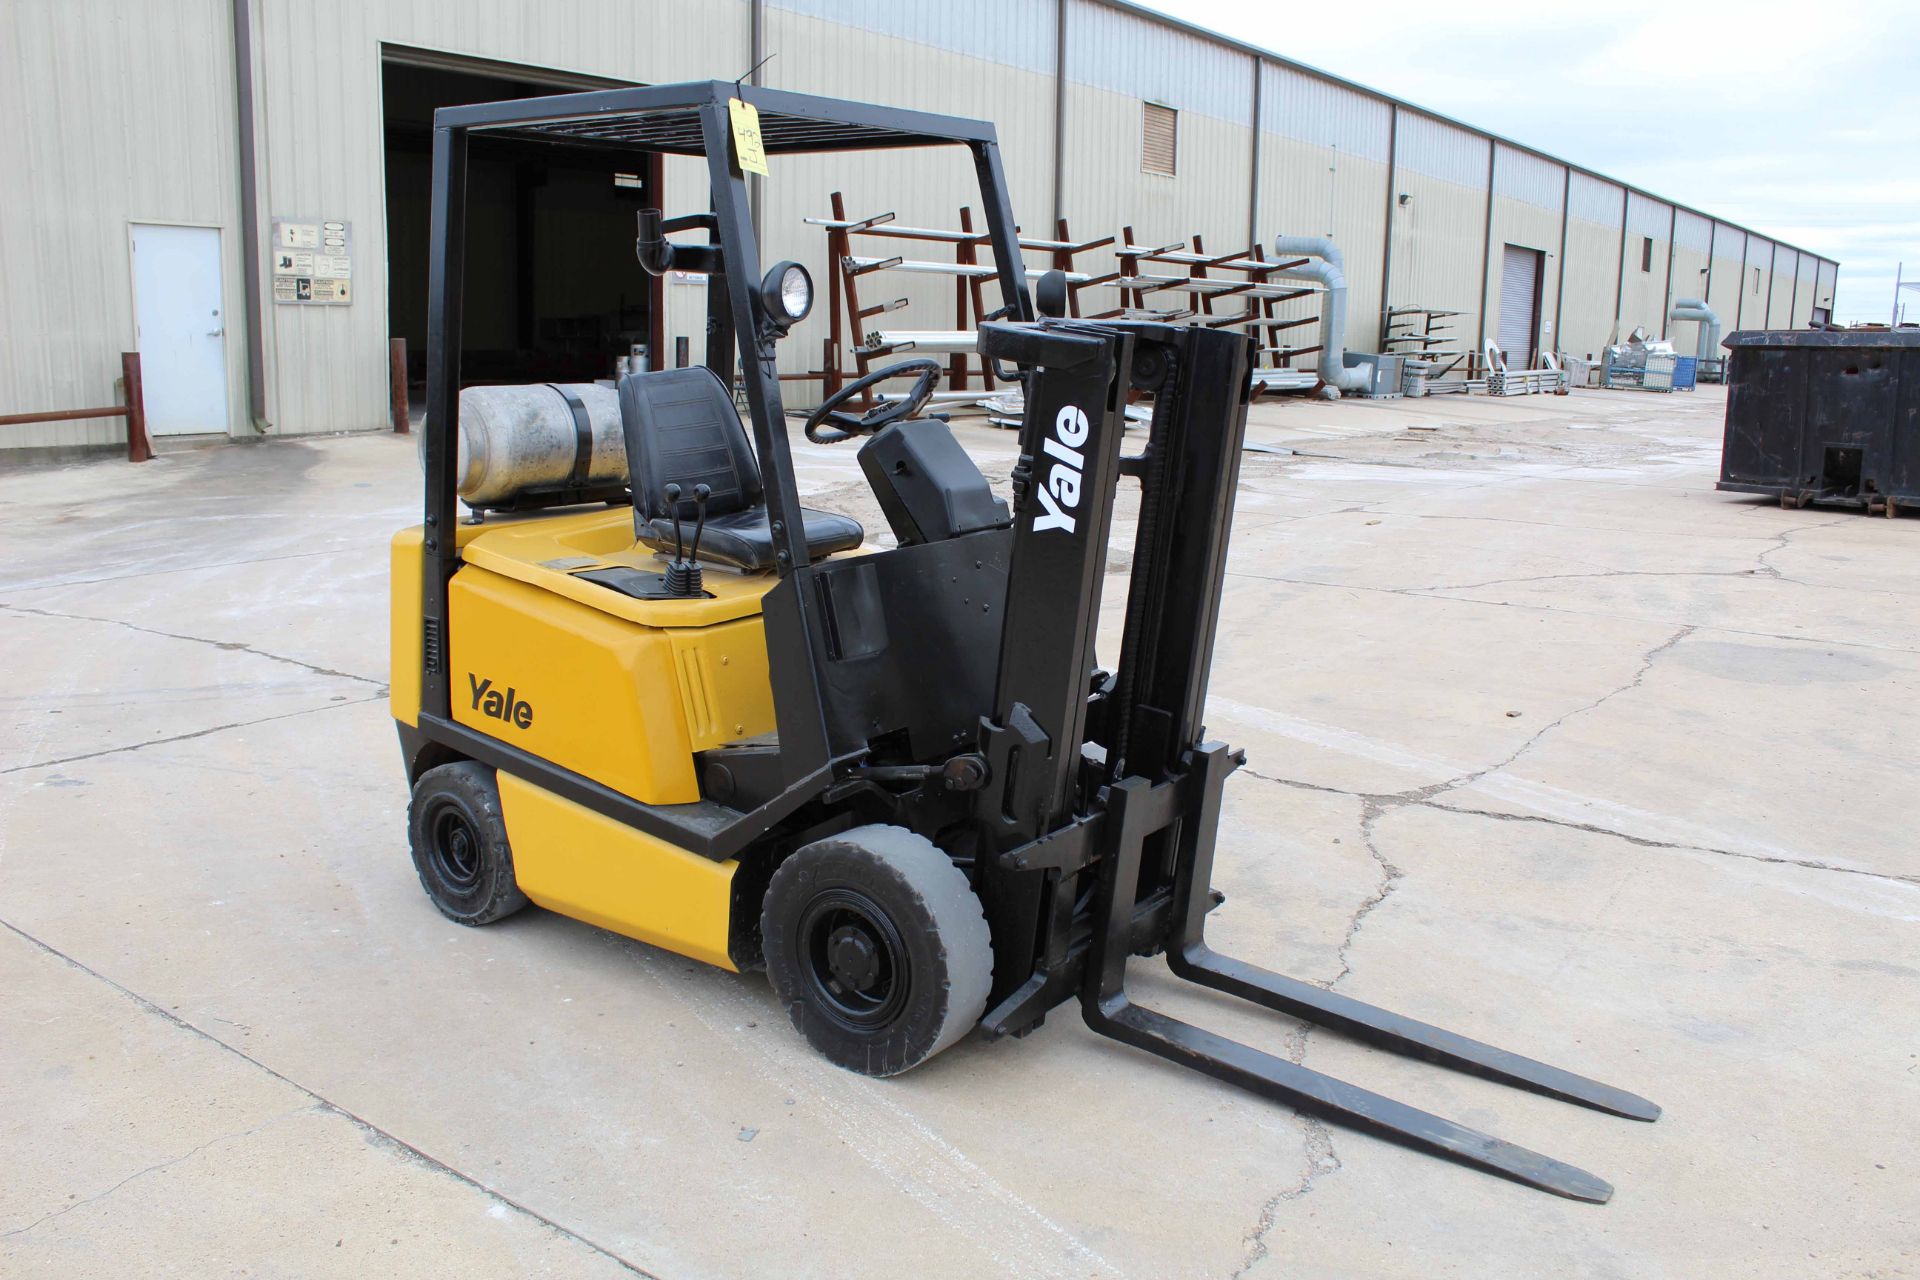 FORKLIFT, YALE 3,000 LB. CAP. MDL. GLP030, new 2000, LPG engine, 83” compact style mast, pneu. style